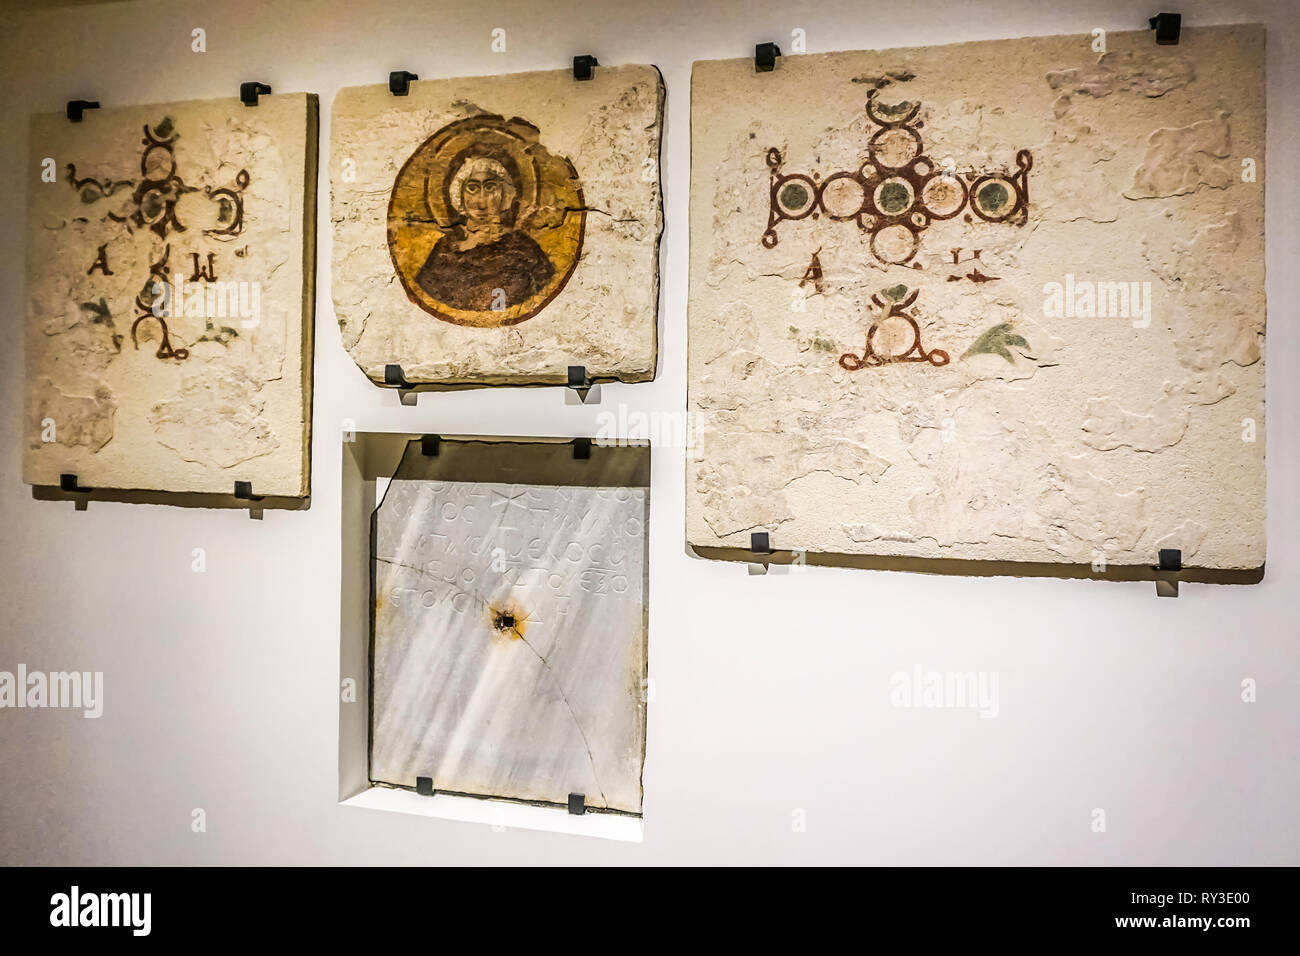 Beirut National Archeological Artifacts Museum Orthodox Christian Crosses and Saint Stock Photo